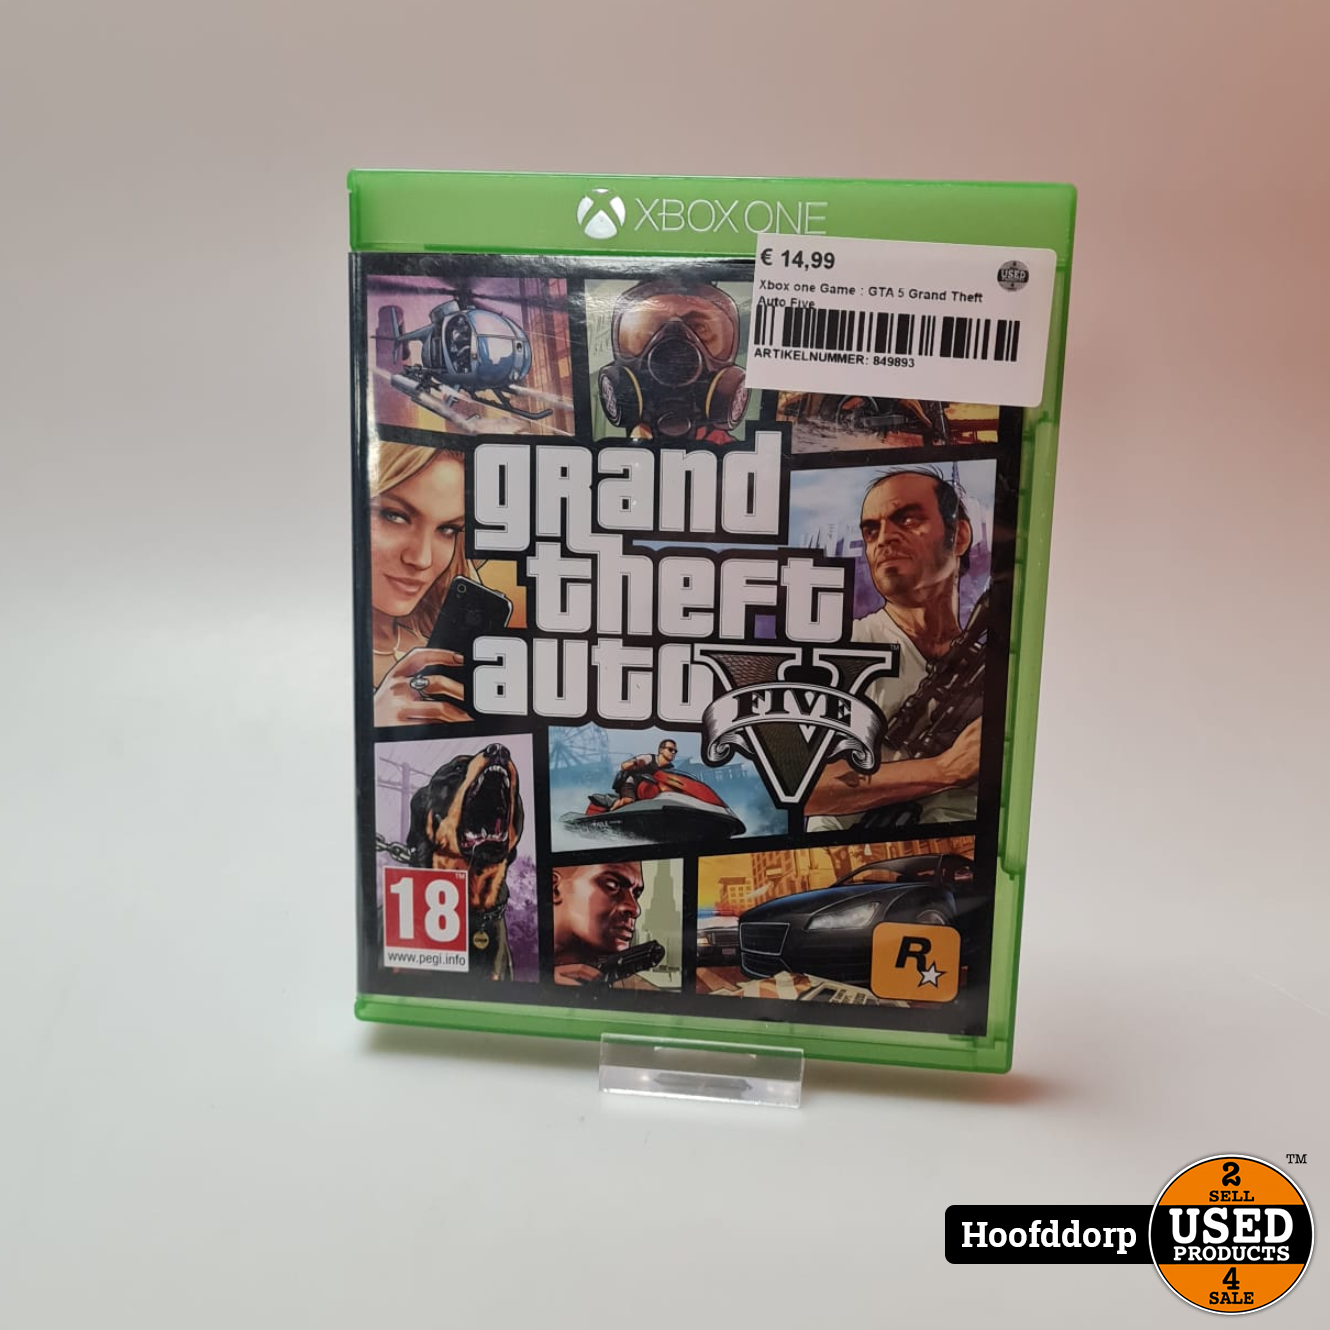 boycot Zachtmoedigheid Geheugen Xbox one Game : GTA 5 Grand Theft Auto Five - Used Products Hoofddorp